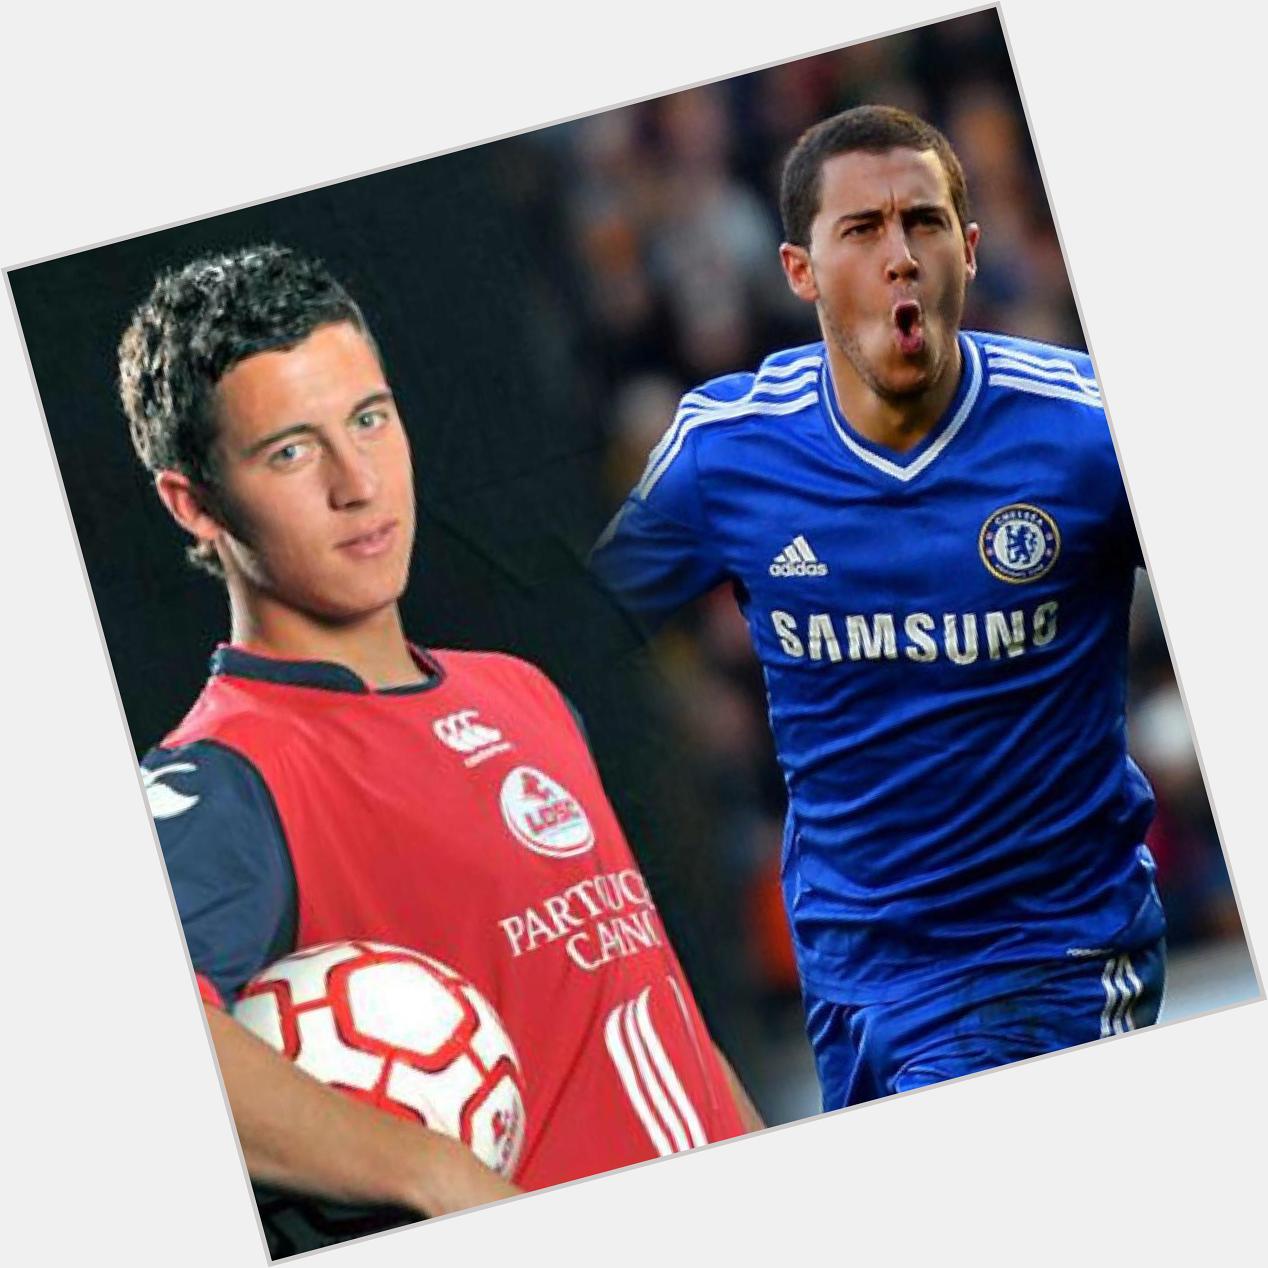 From an ordinary young boy, to one of the best players in the world.

Happy birthday Eden Hazard. 